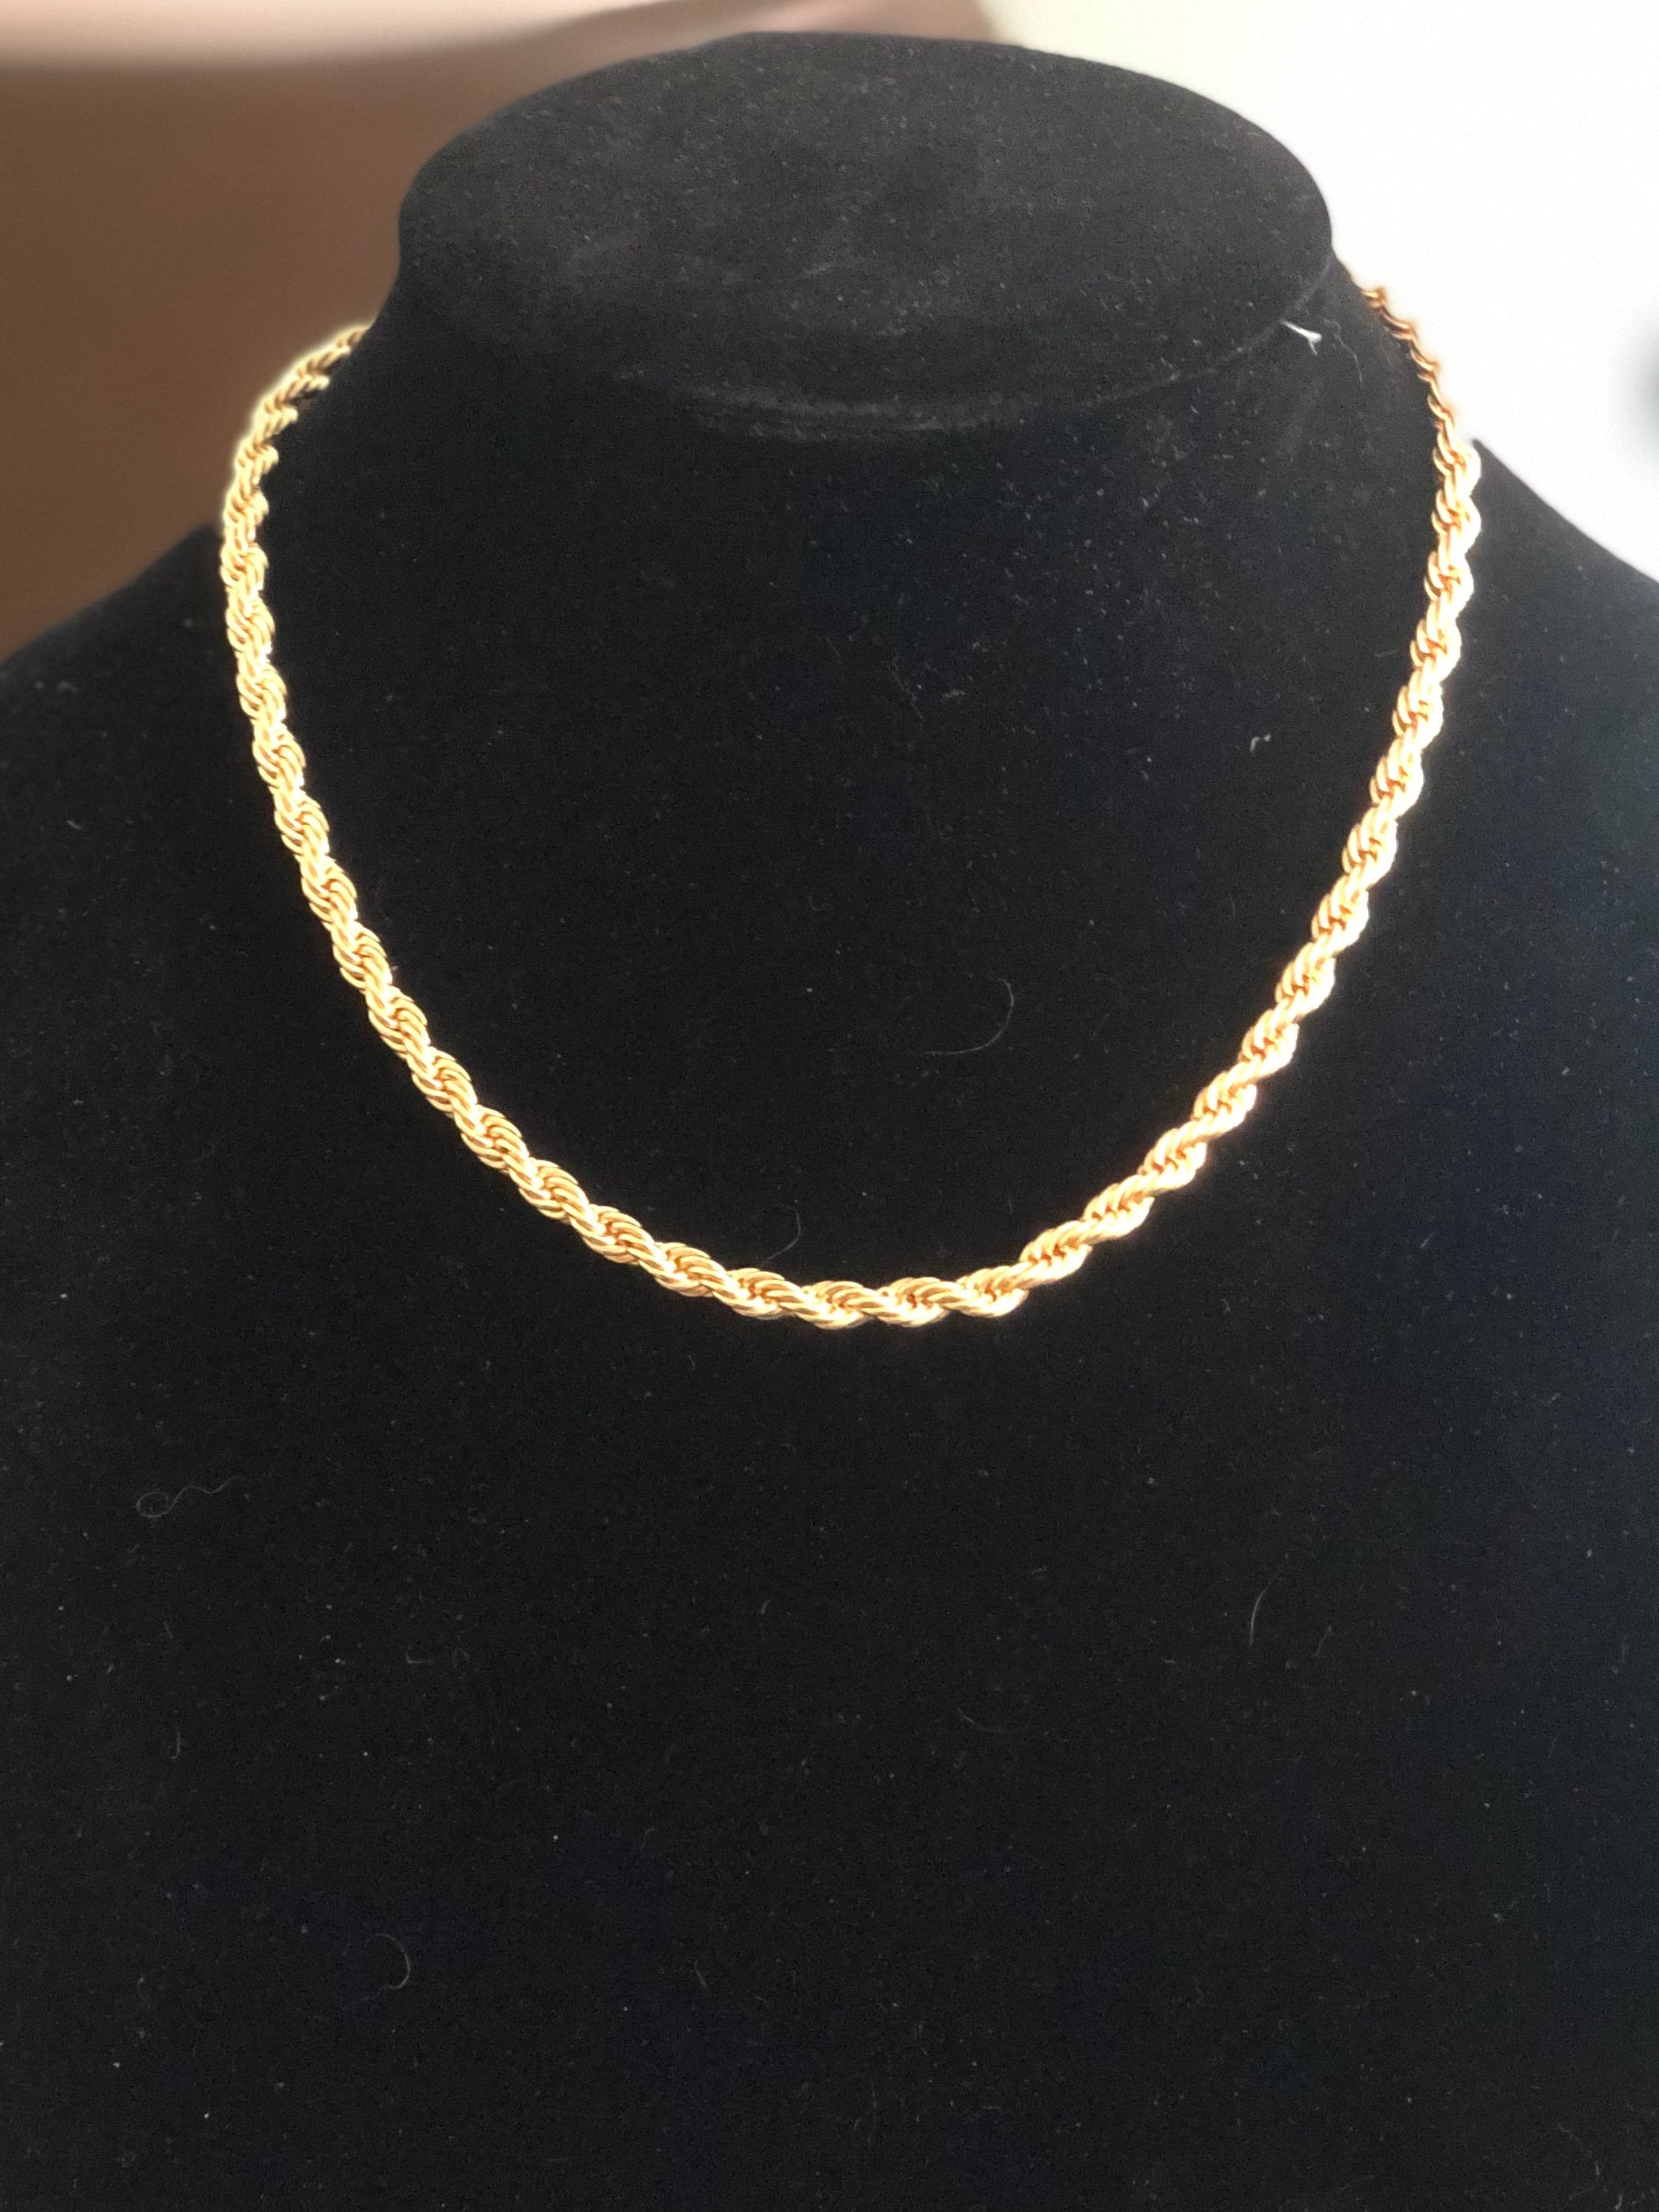 4/6/8/10 mm 24K Yellow Gold Filled Rope Chain Necklace 20 22 24 26 28 30 inch 